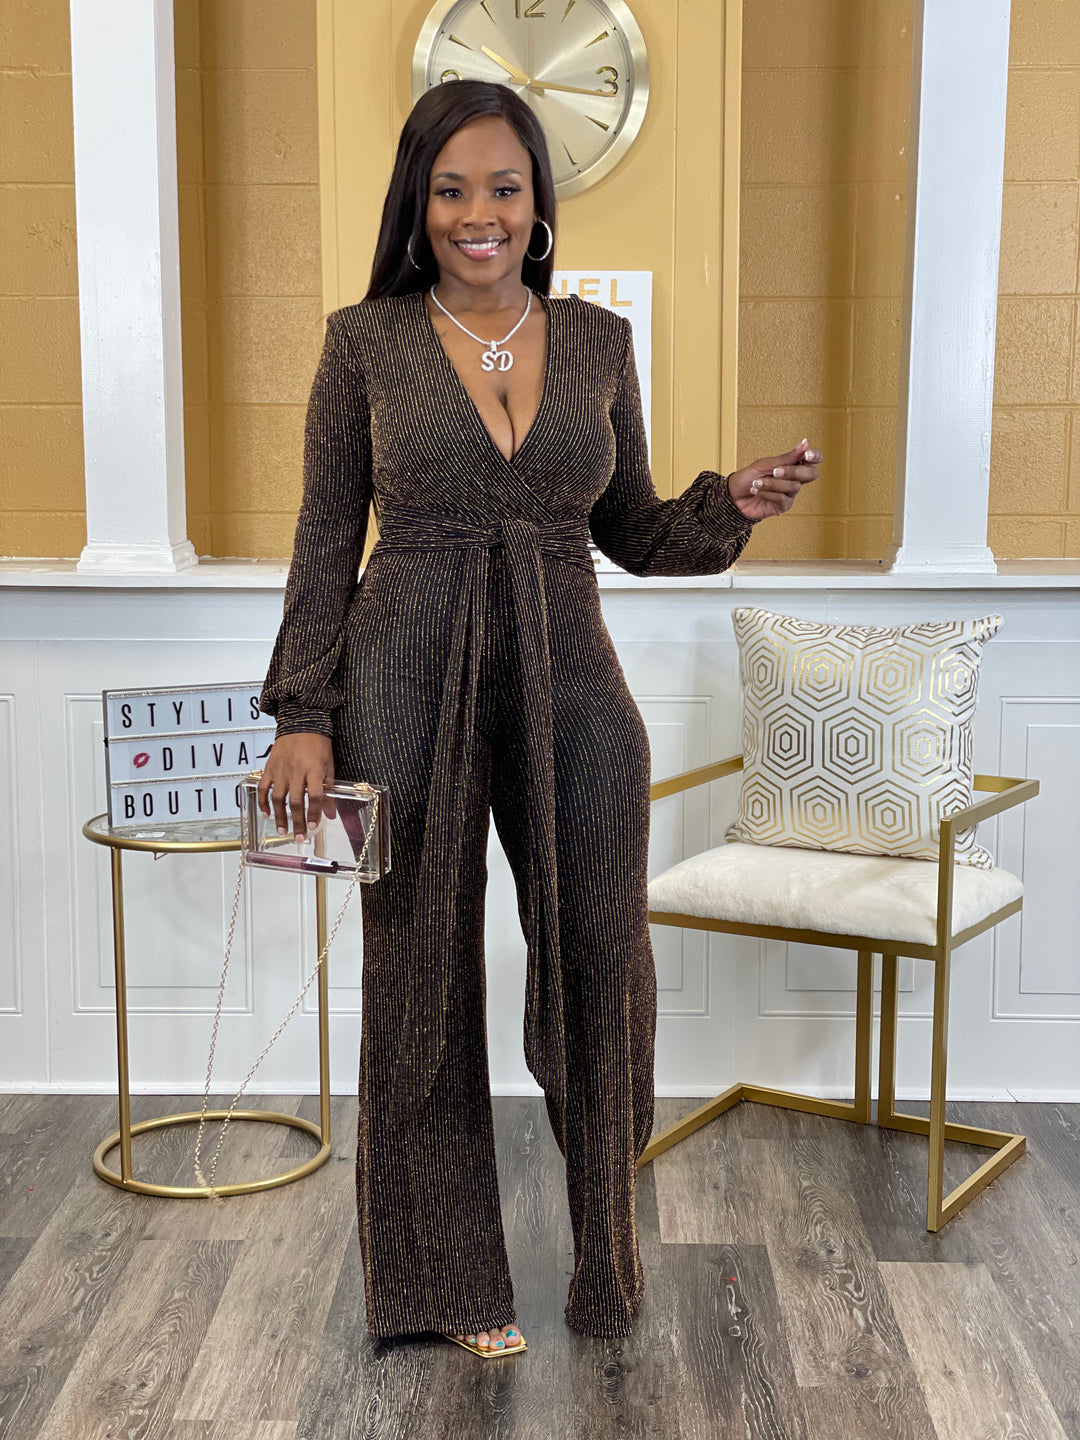 Runway Jumpsuit up to 3XL (Black/Gold)